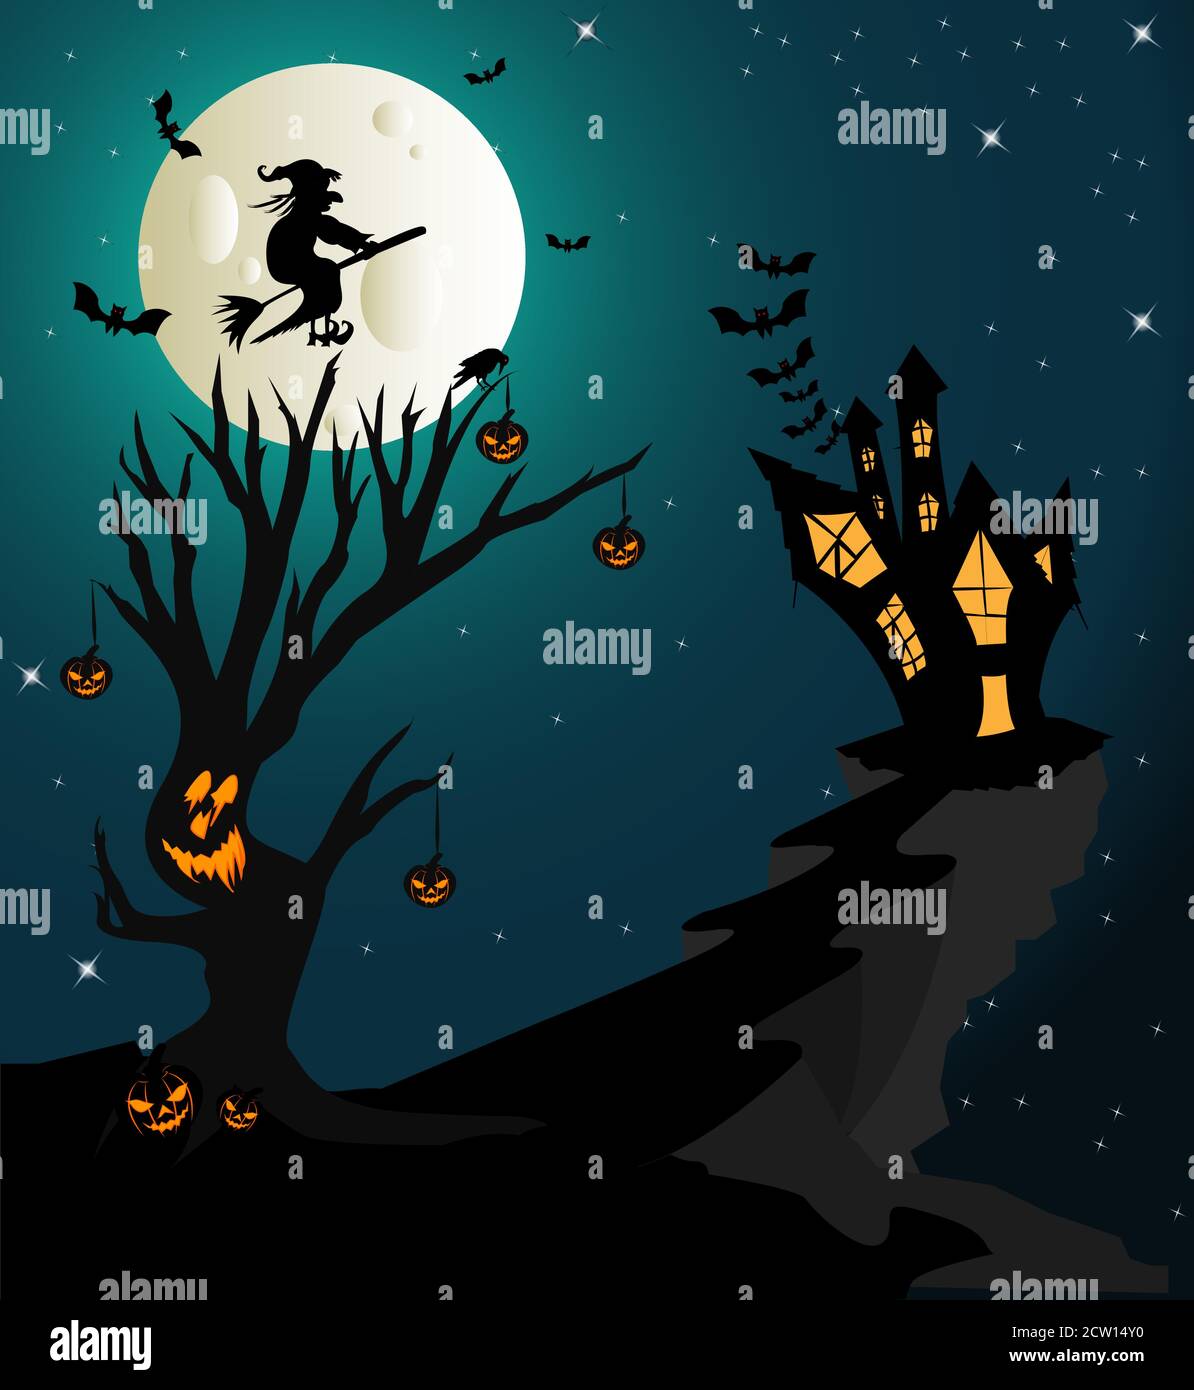 Spooky Halloween tree with witch flying on broom to her home vector illustration for banners, party invitations and greeting cards. Stock Vector